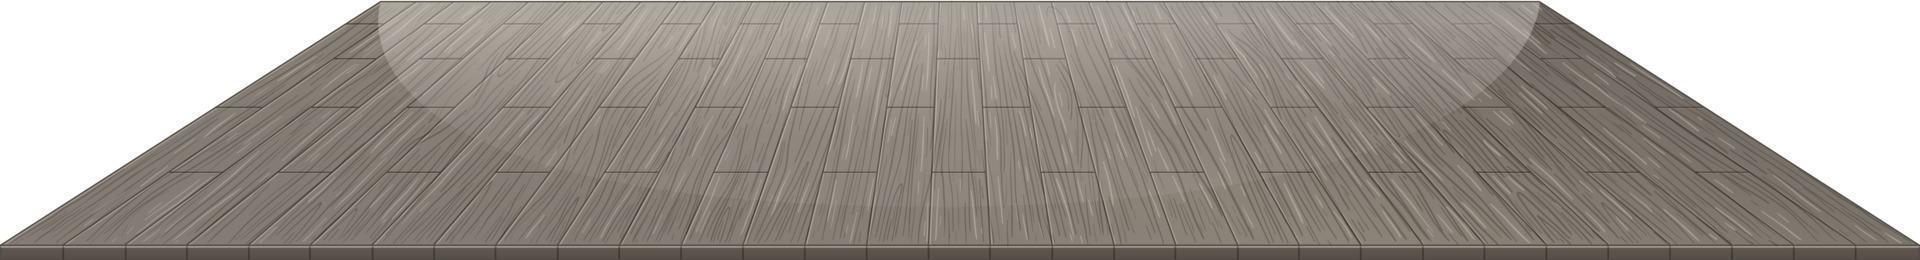 Grey wooden floor tiles isolated on white background vector